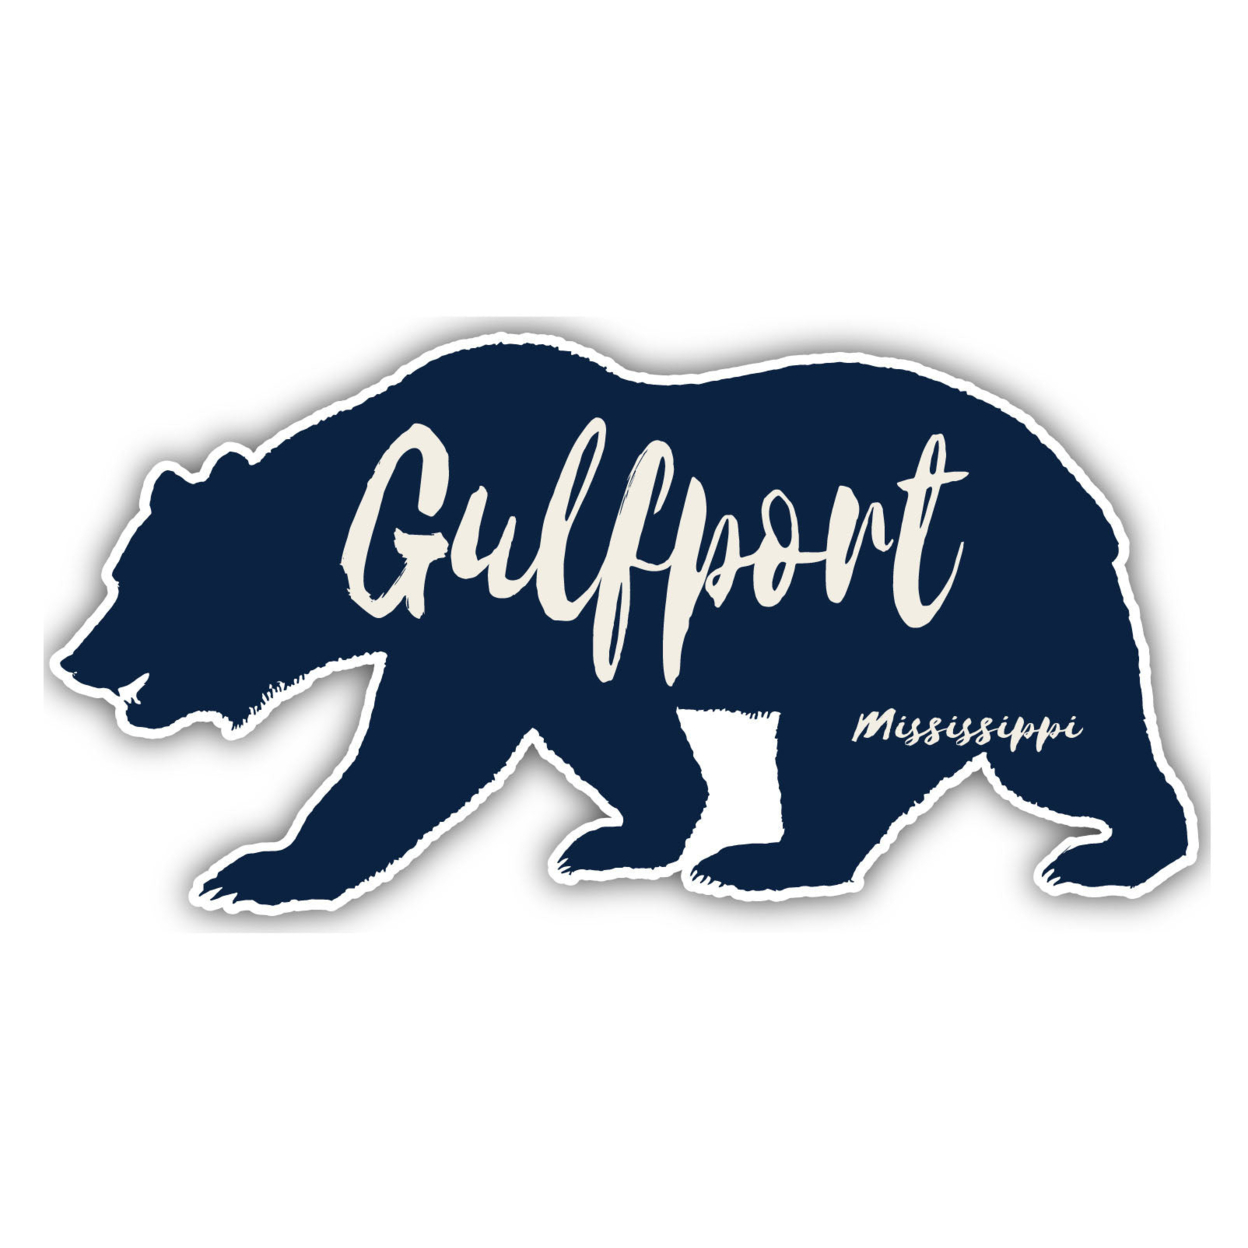 Gulfport Mississippi Souvenir Decorative Stickers (Choose Theme And Size) - Single Unit, 6-Inch, Bear